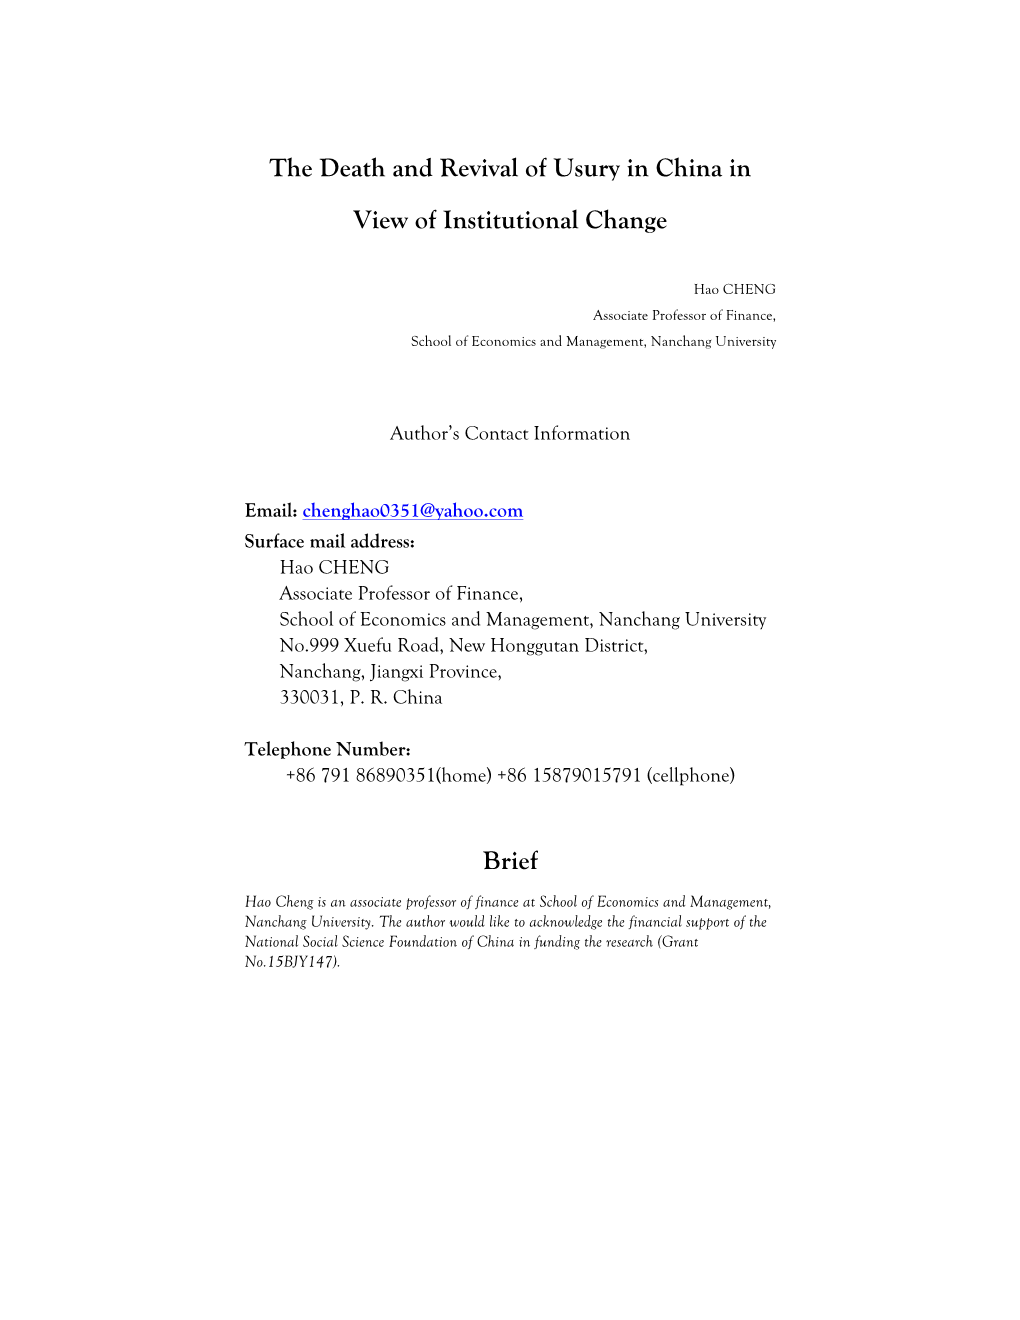 The Death and Revival of Usury in China in View of Institutional Change